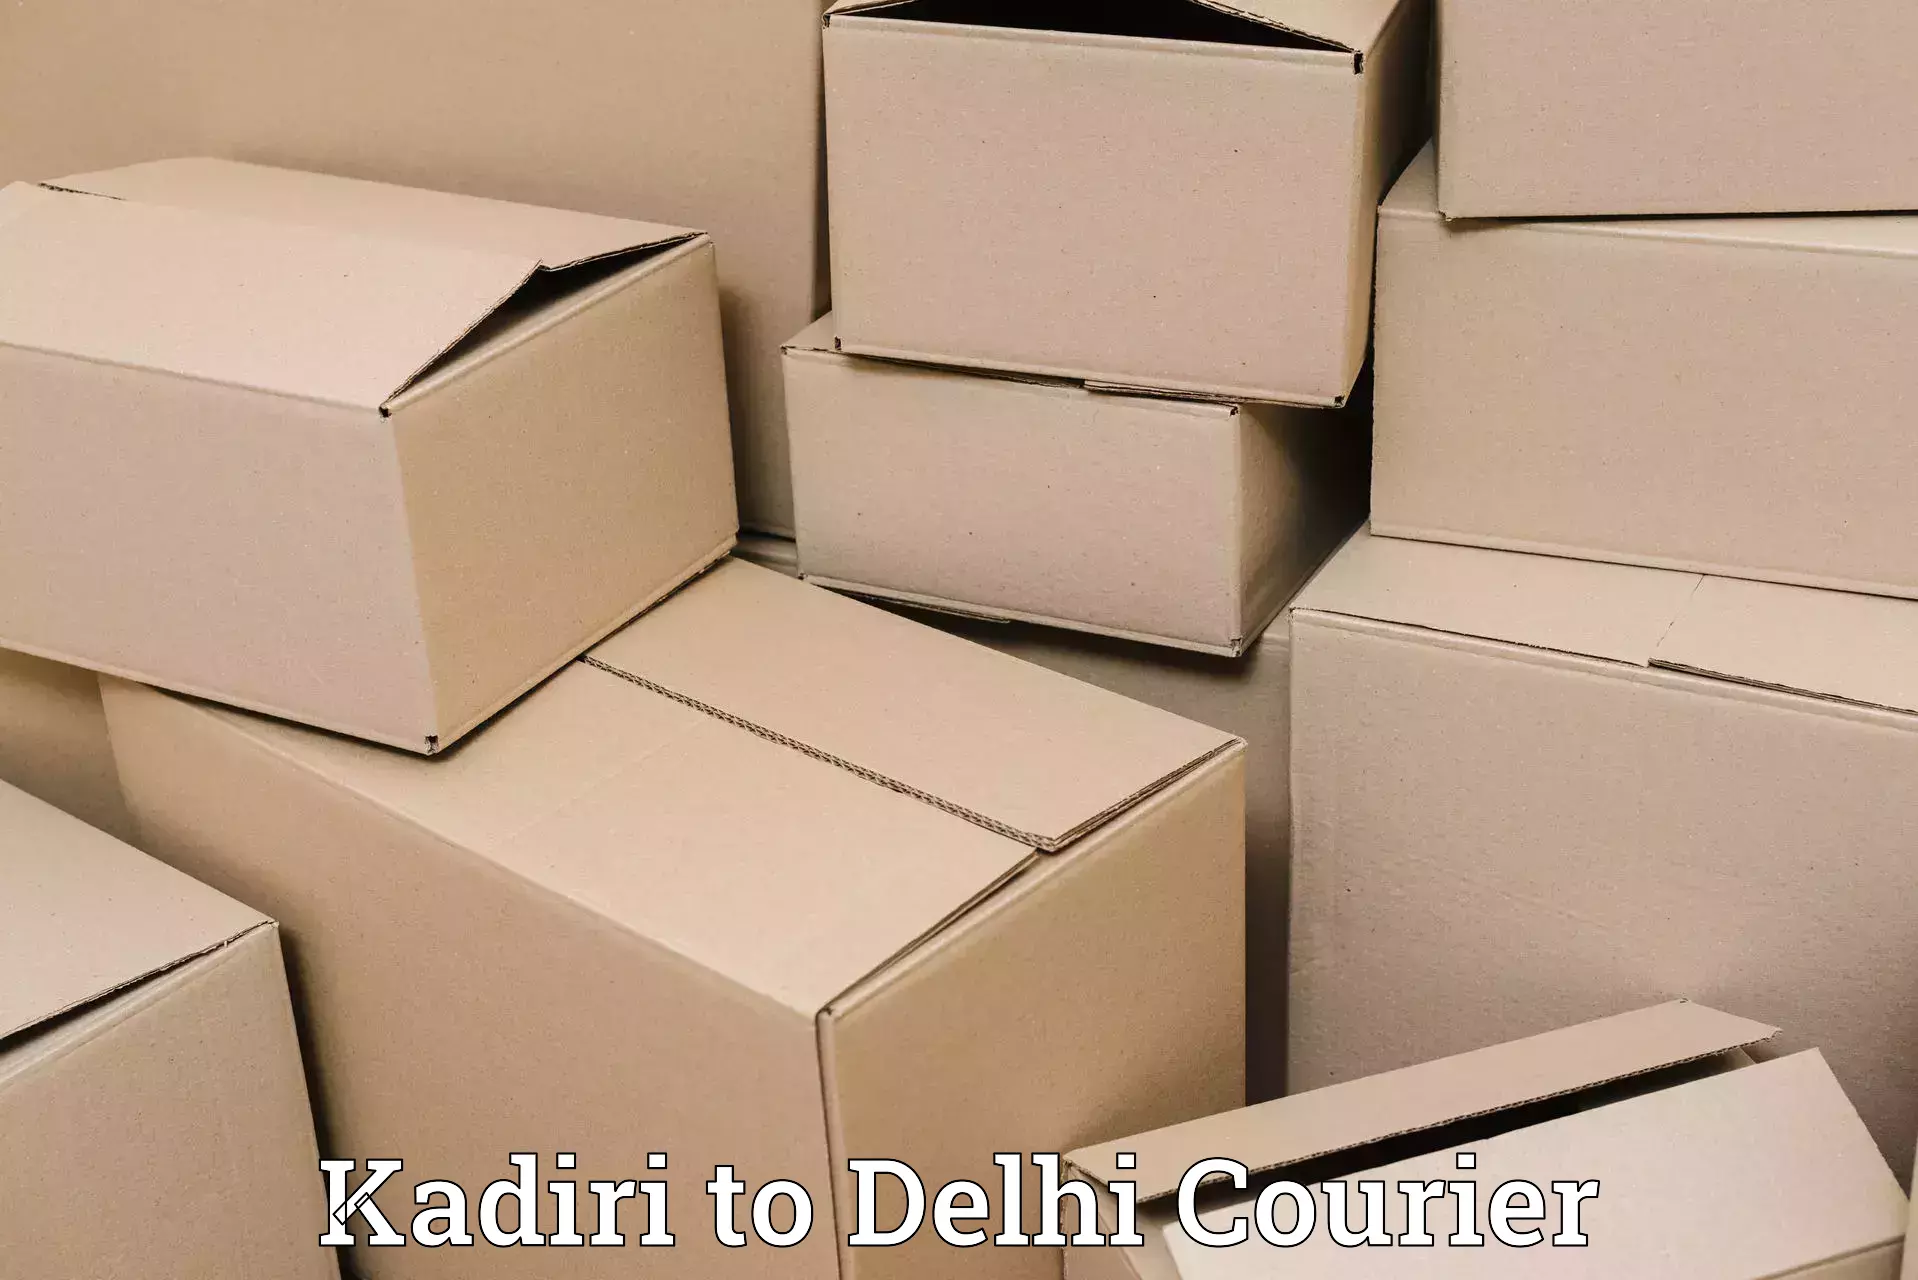 High-quality delivery services Kadiri to Delhi Technological University DTU